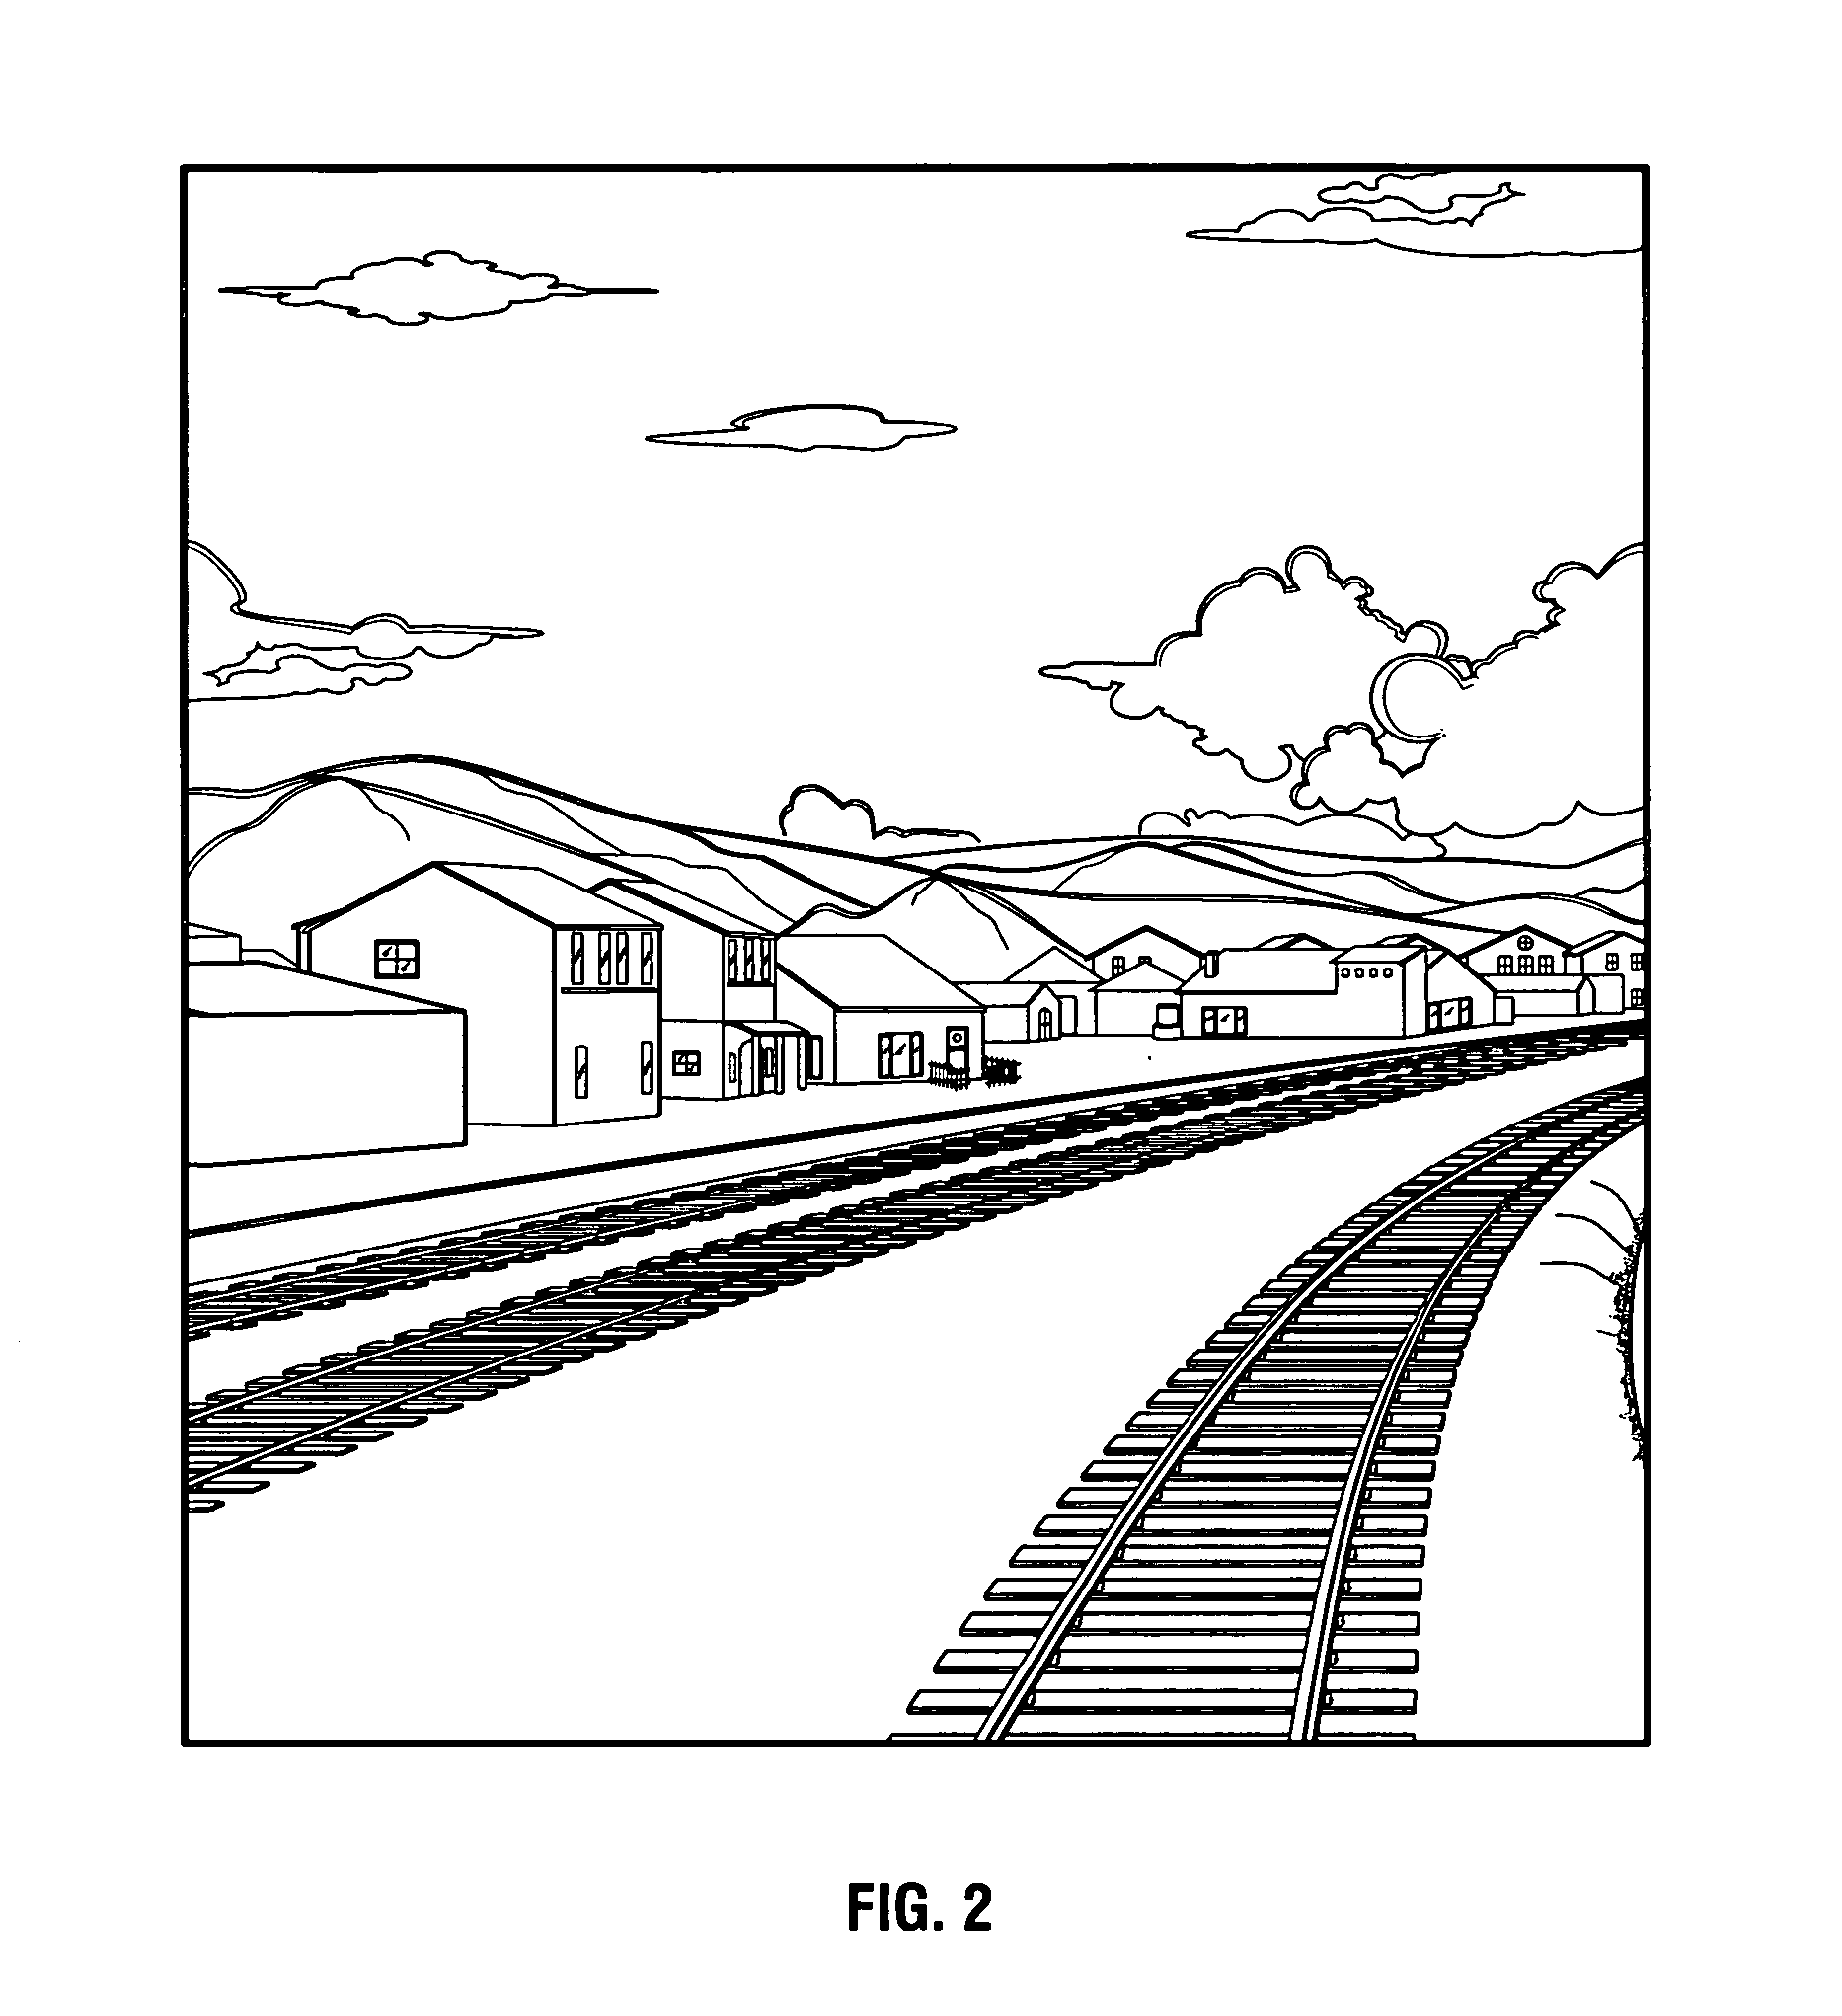 Method and apparatus for simulating a train and track